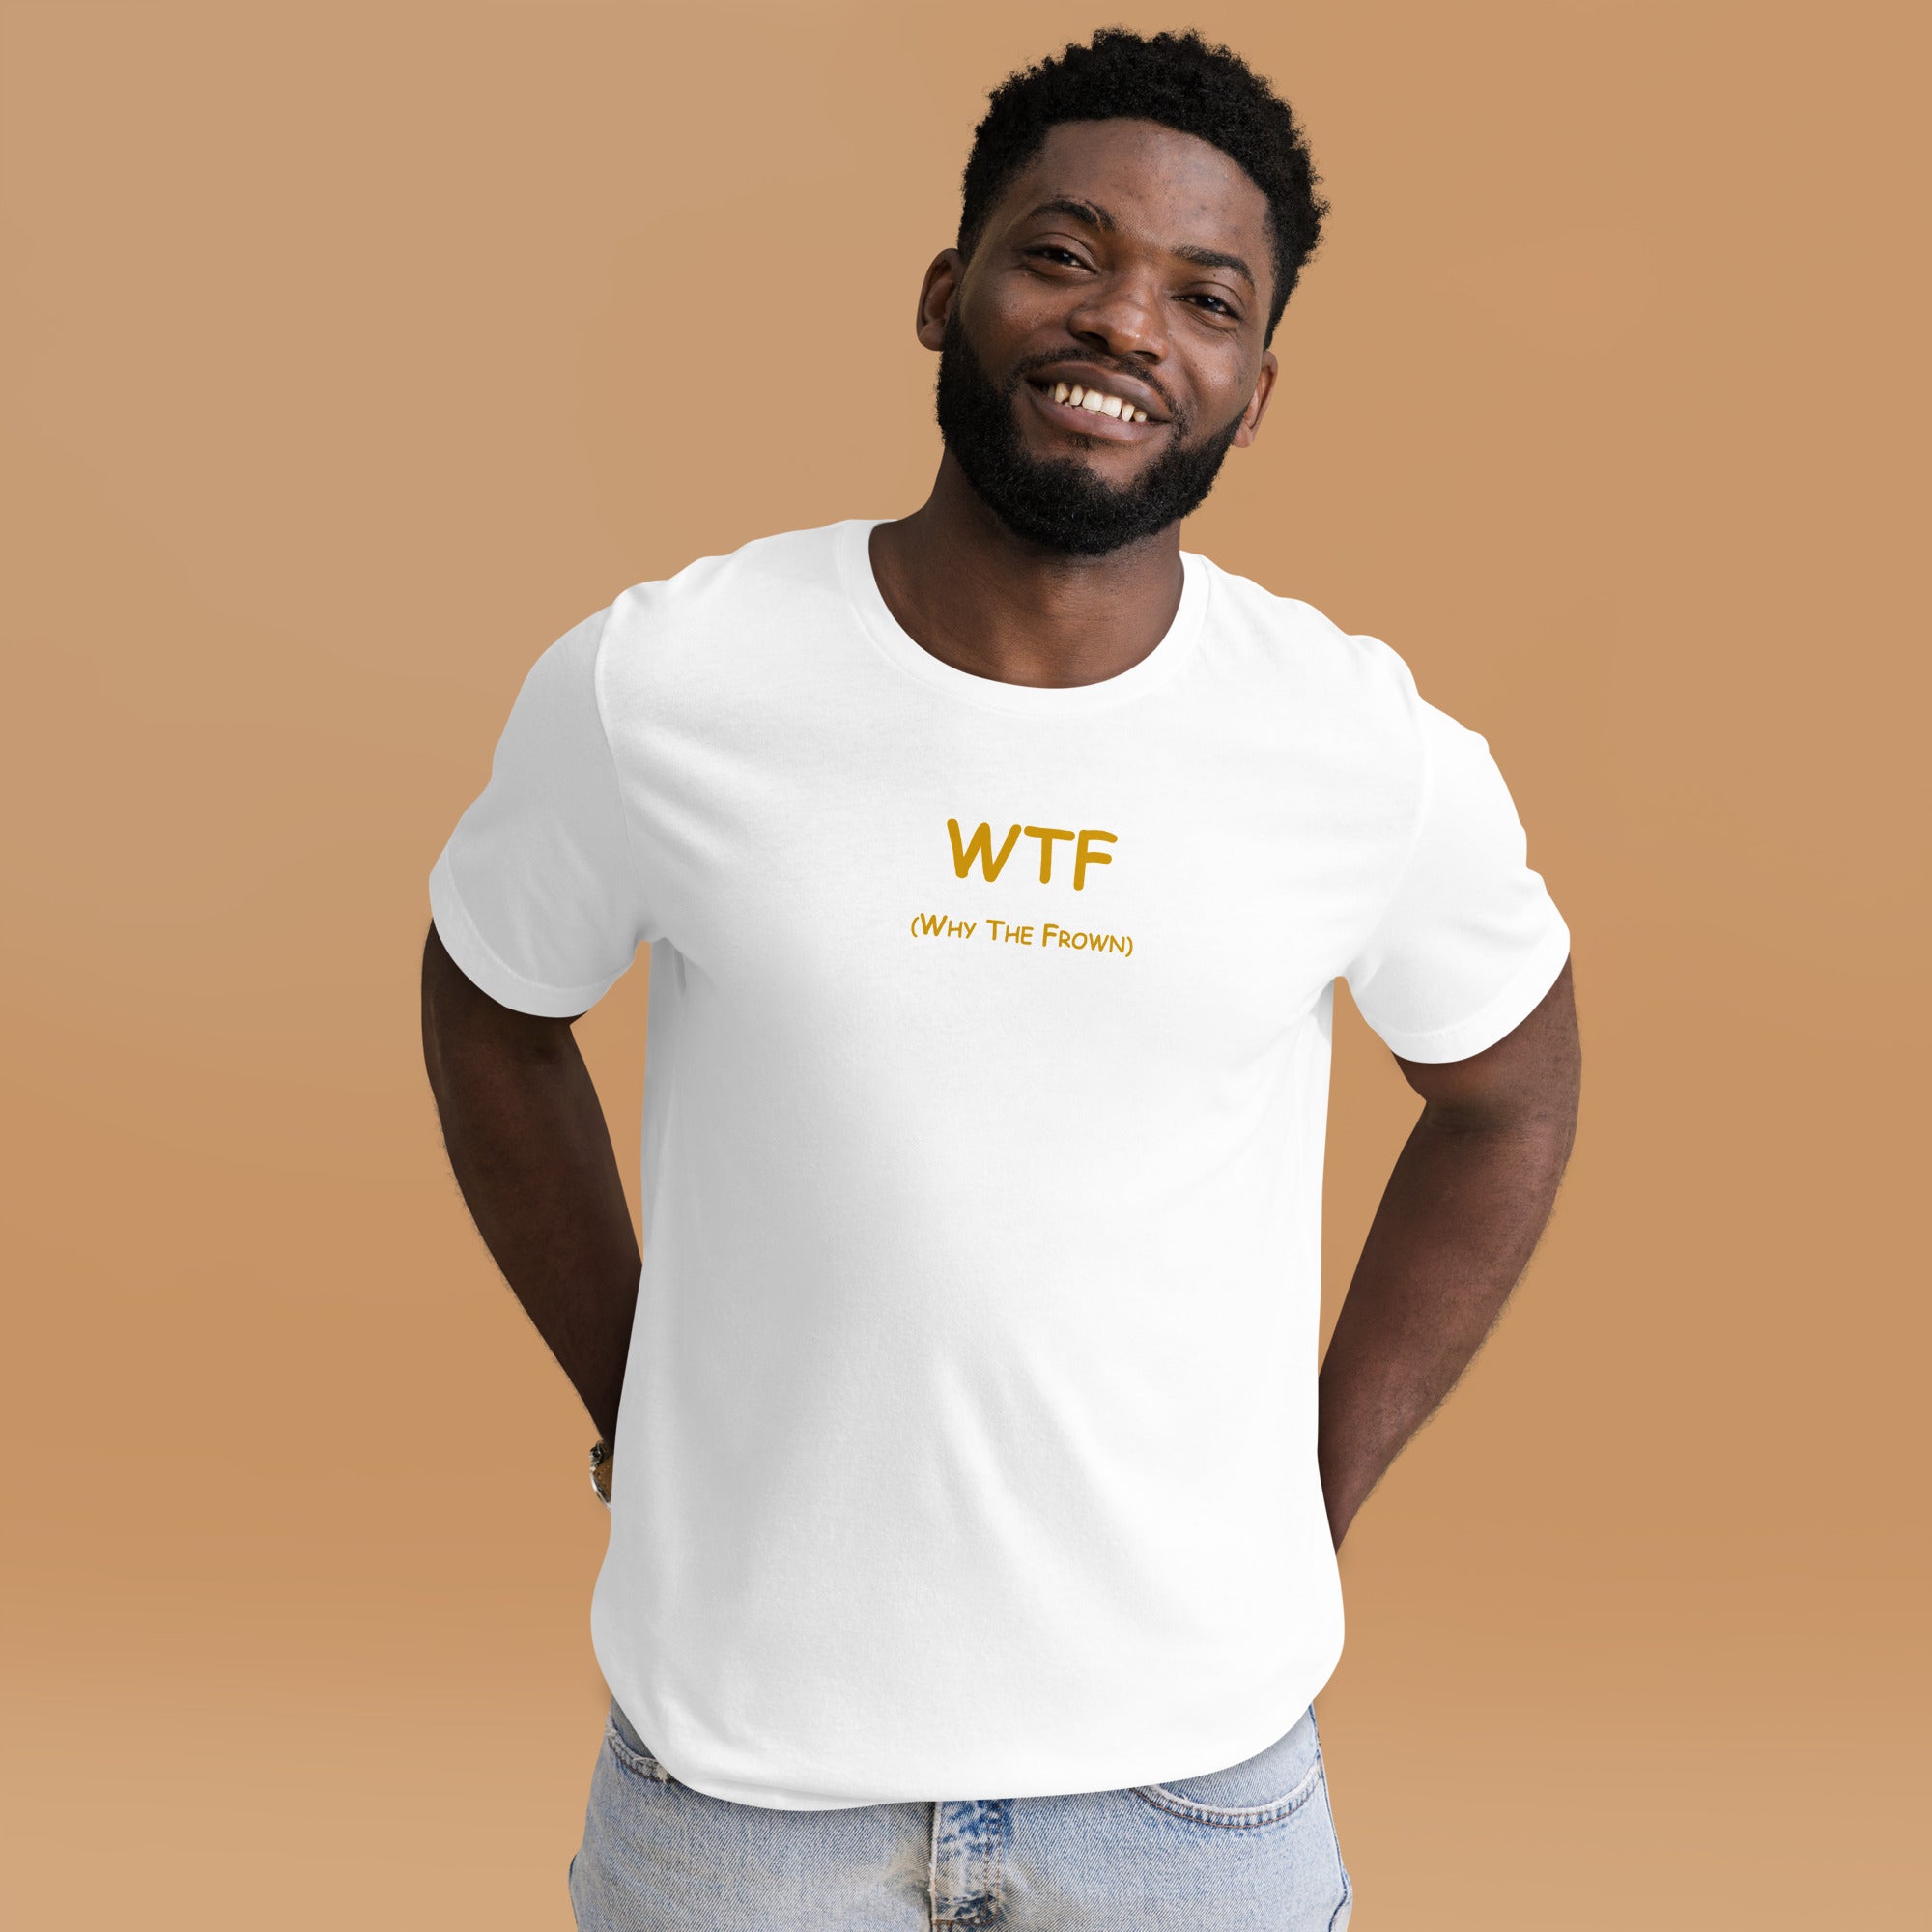 WTF (Why The Frown)   Unisex t-shirt